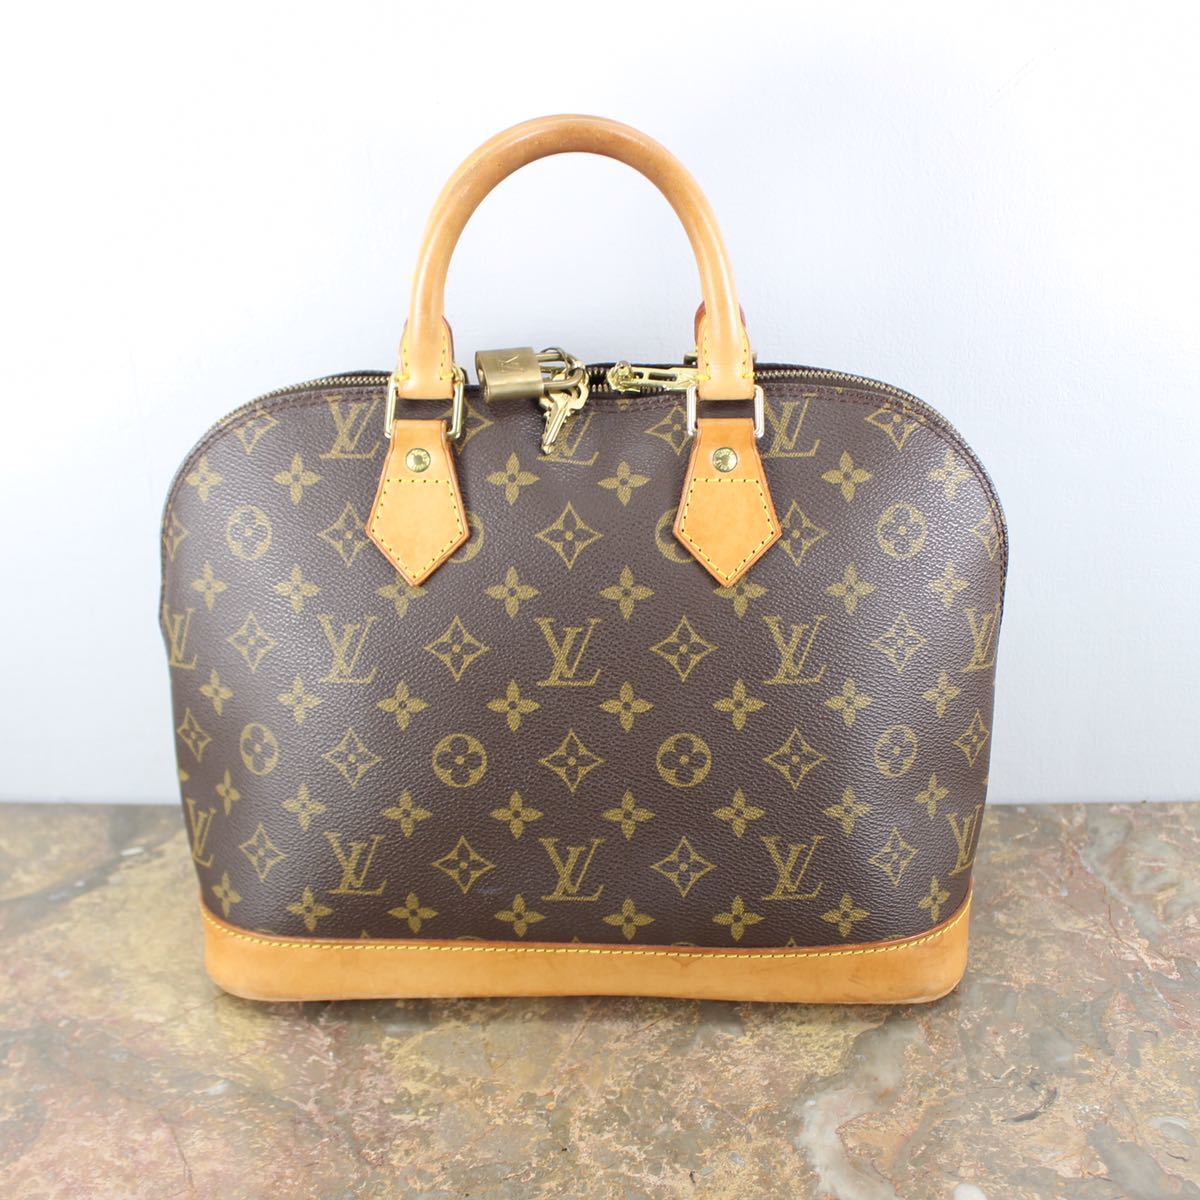 LOUIS VUITTON M51130 VI0919 MONOGRAM PATTERNED HAND BAG MADE IN